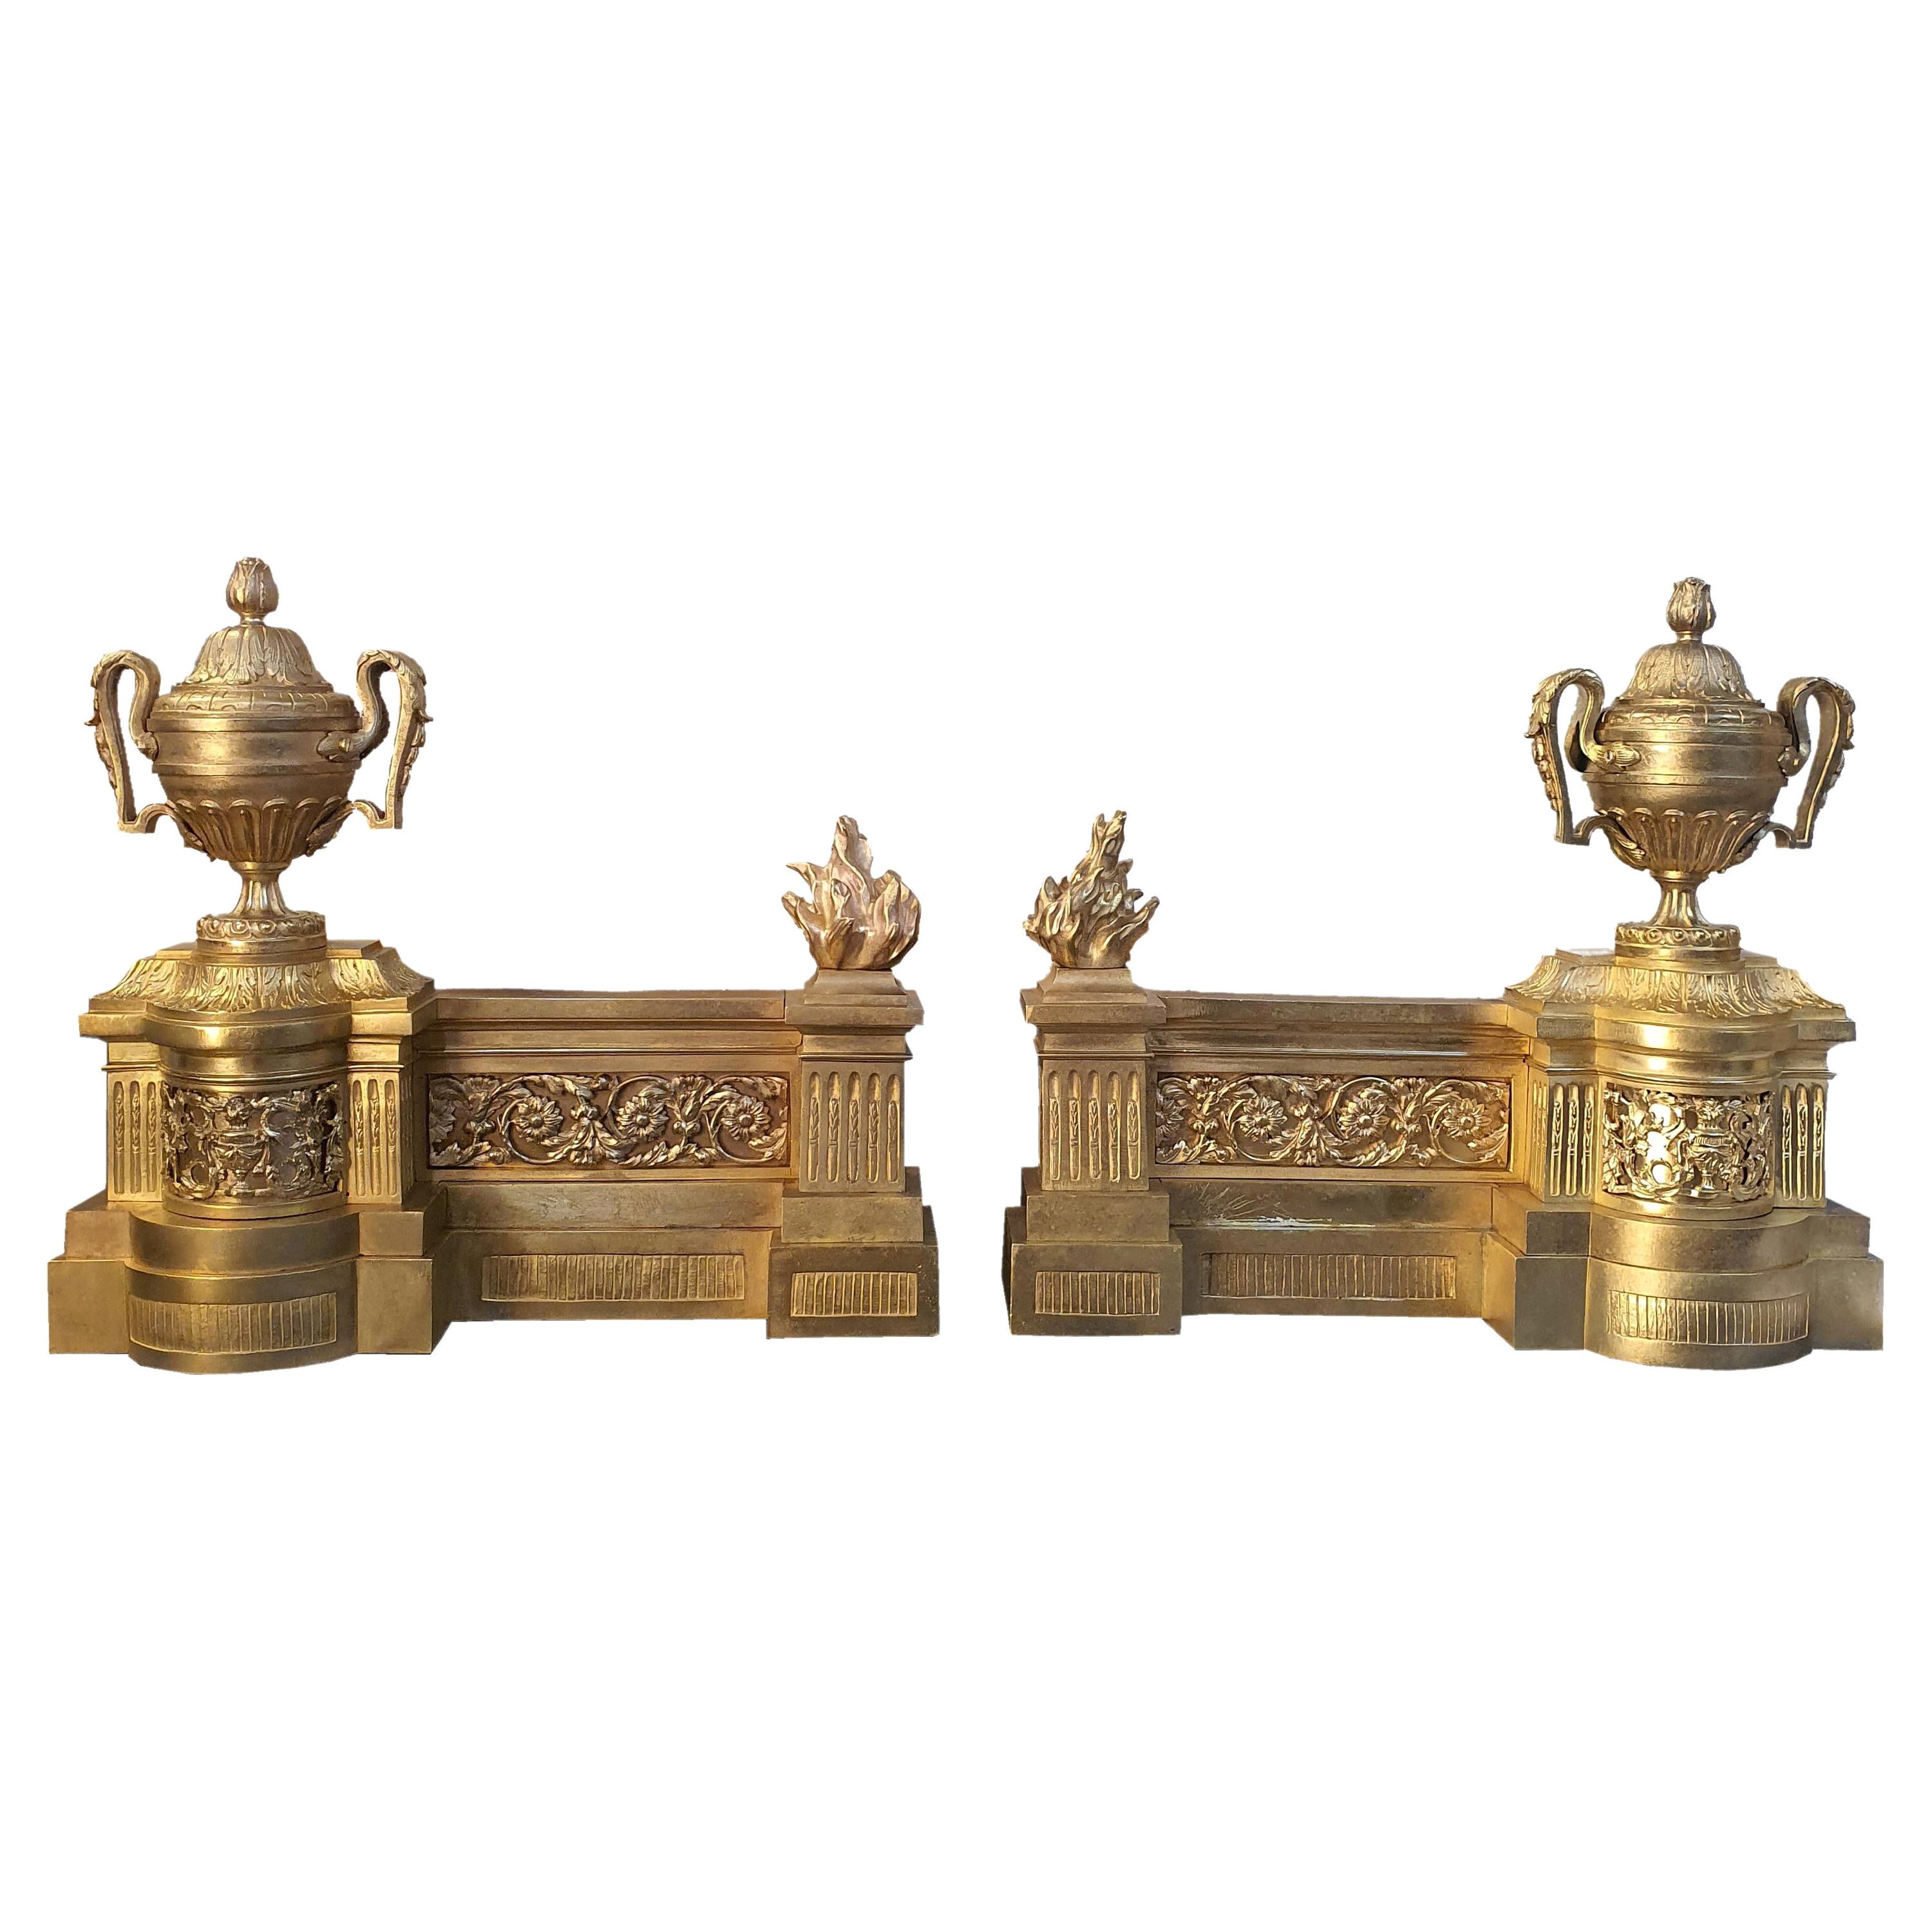 19th Century, Pair of Andirons for Fireplace, Gilt Bronze